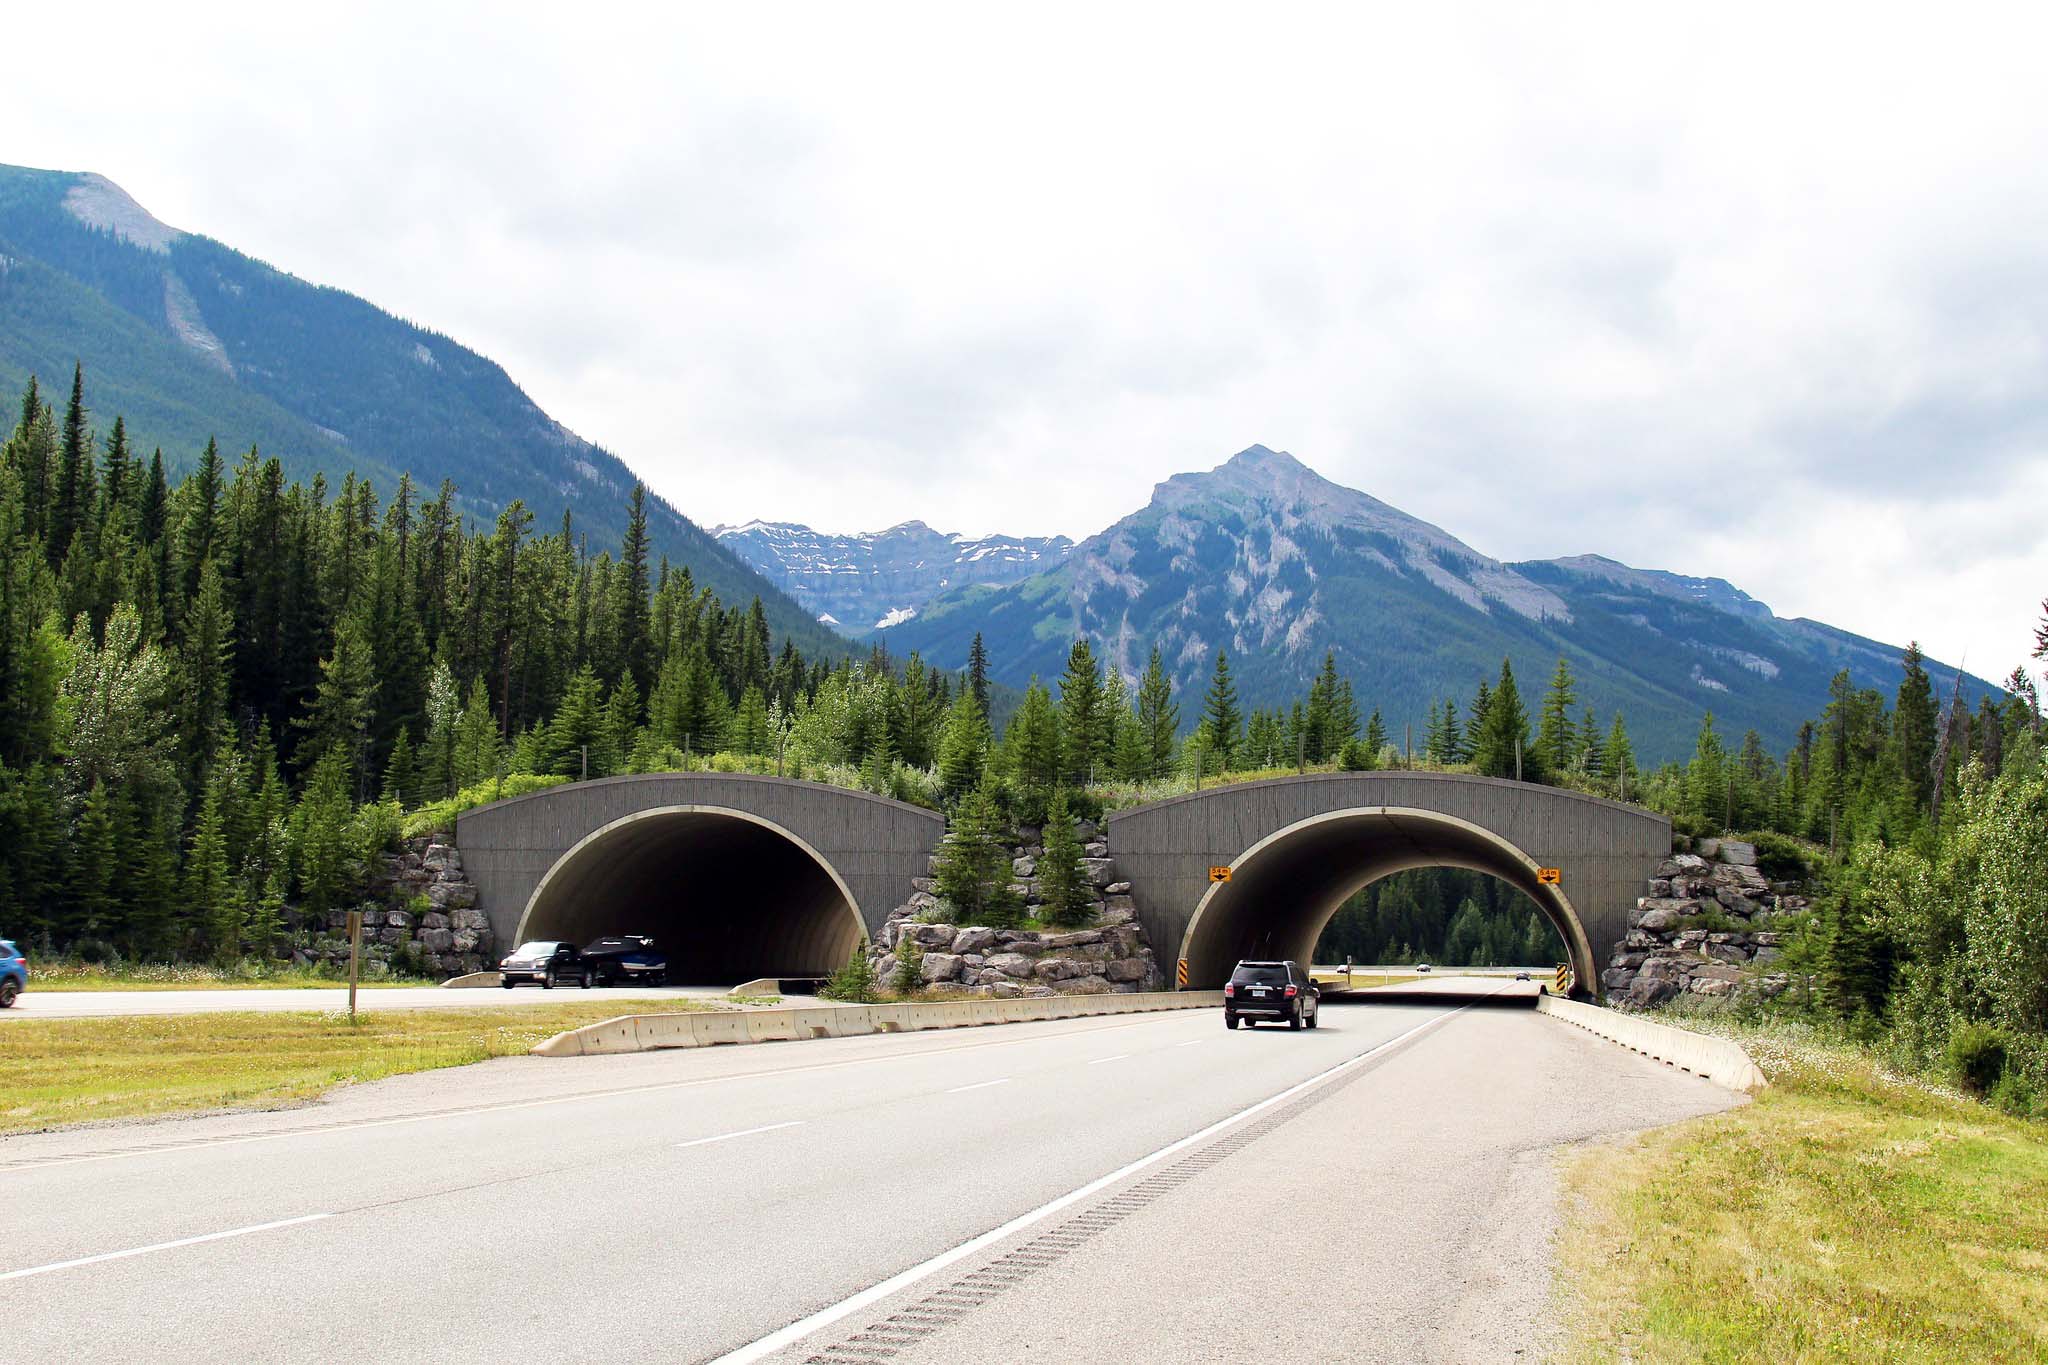 A view of the Trans-Canada Highway as it is crossed by a wildlife overpass, with mountains in the background